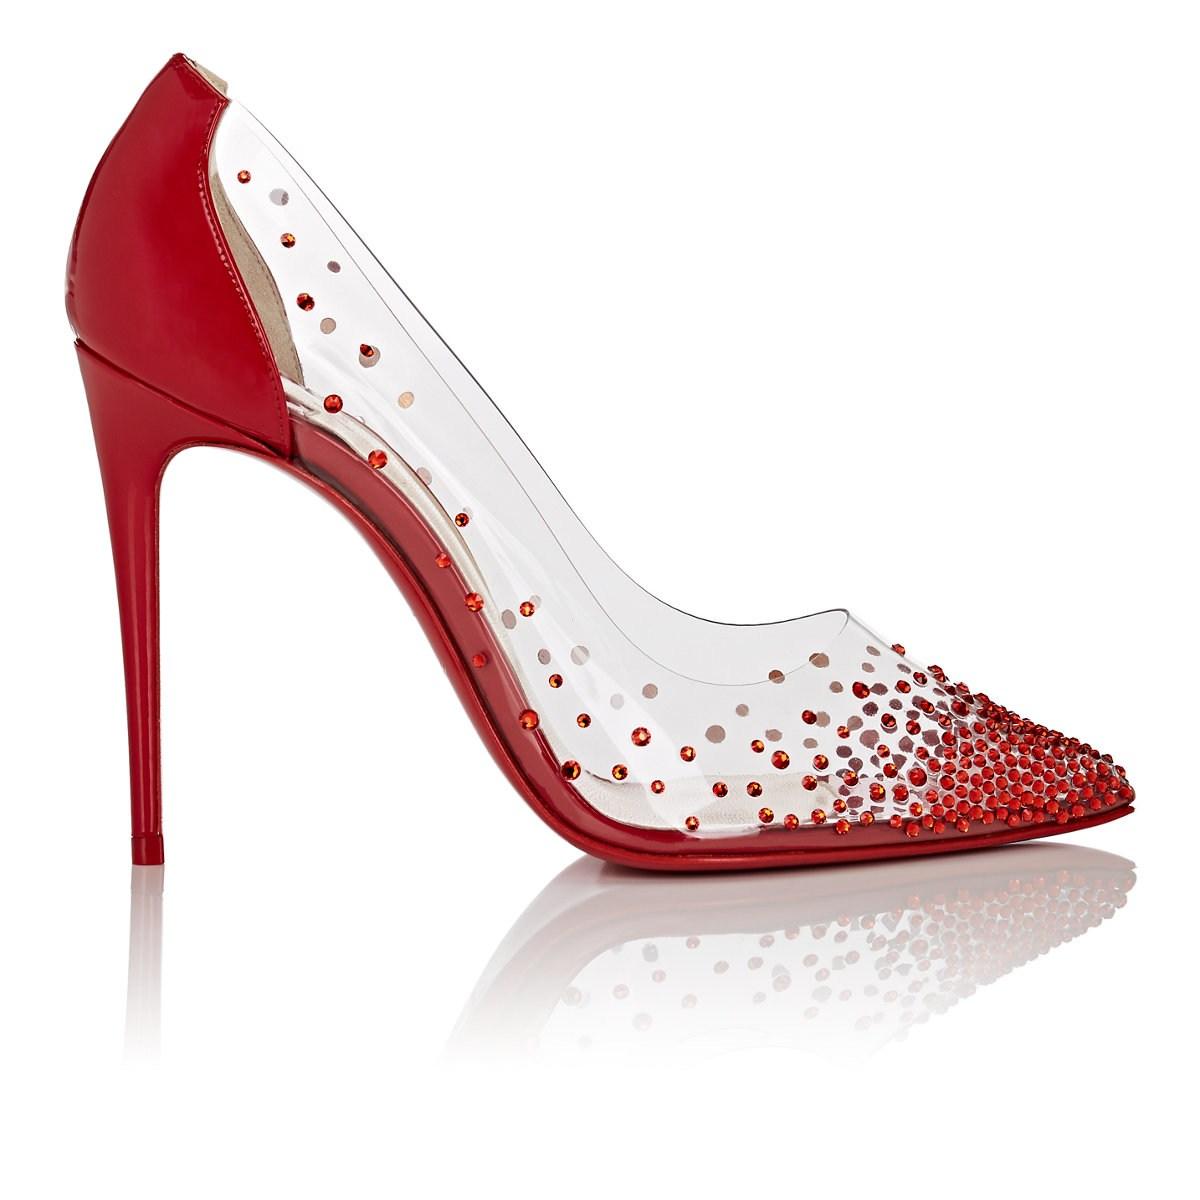 Christian Louboutin Degrastrass Pvc & Leather Pumps in Red - Lyst